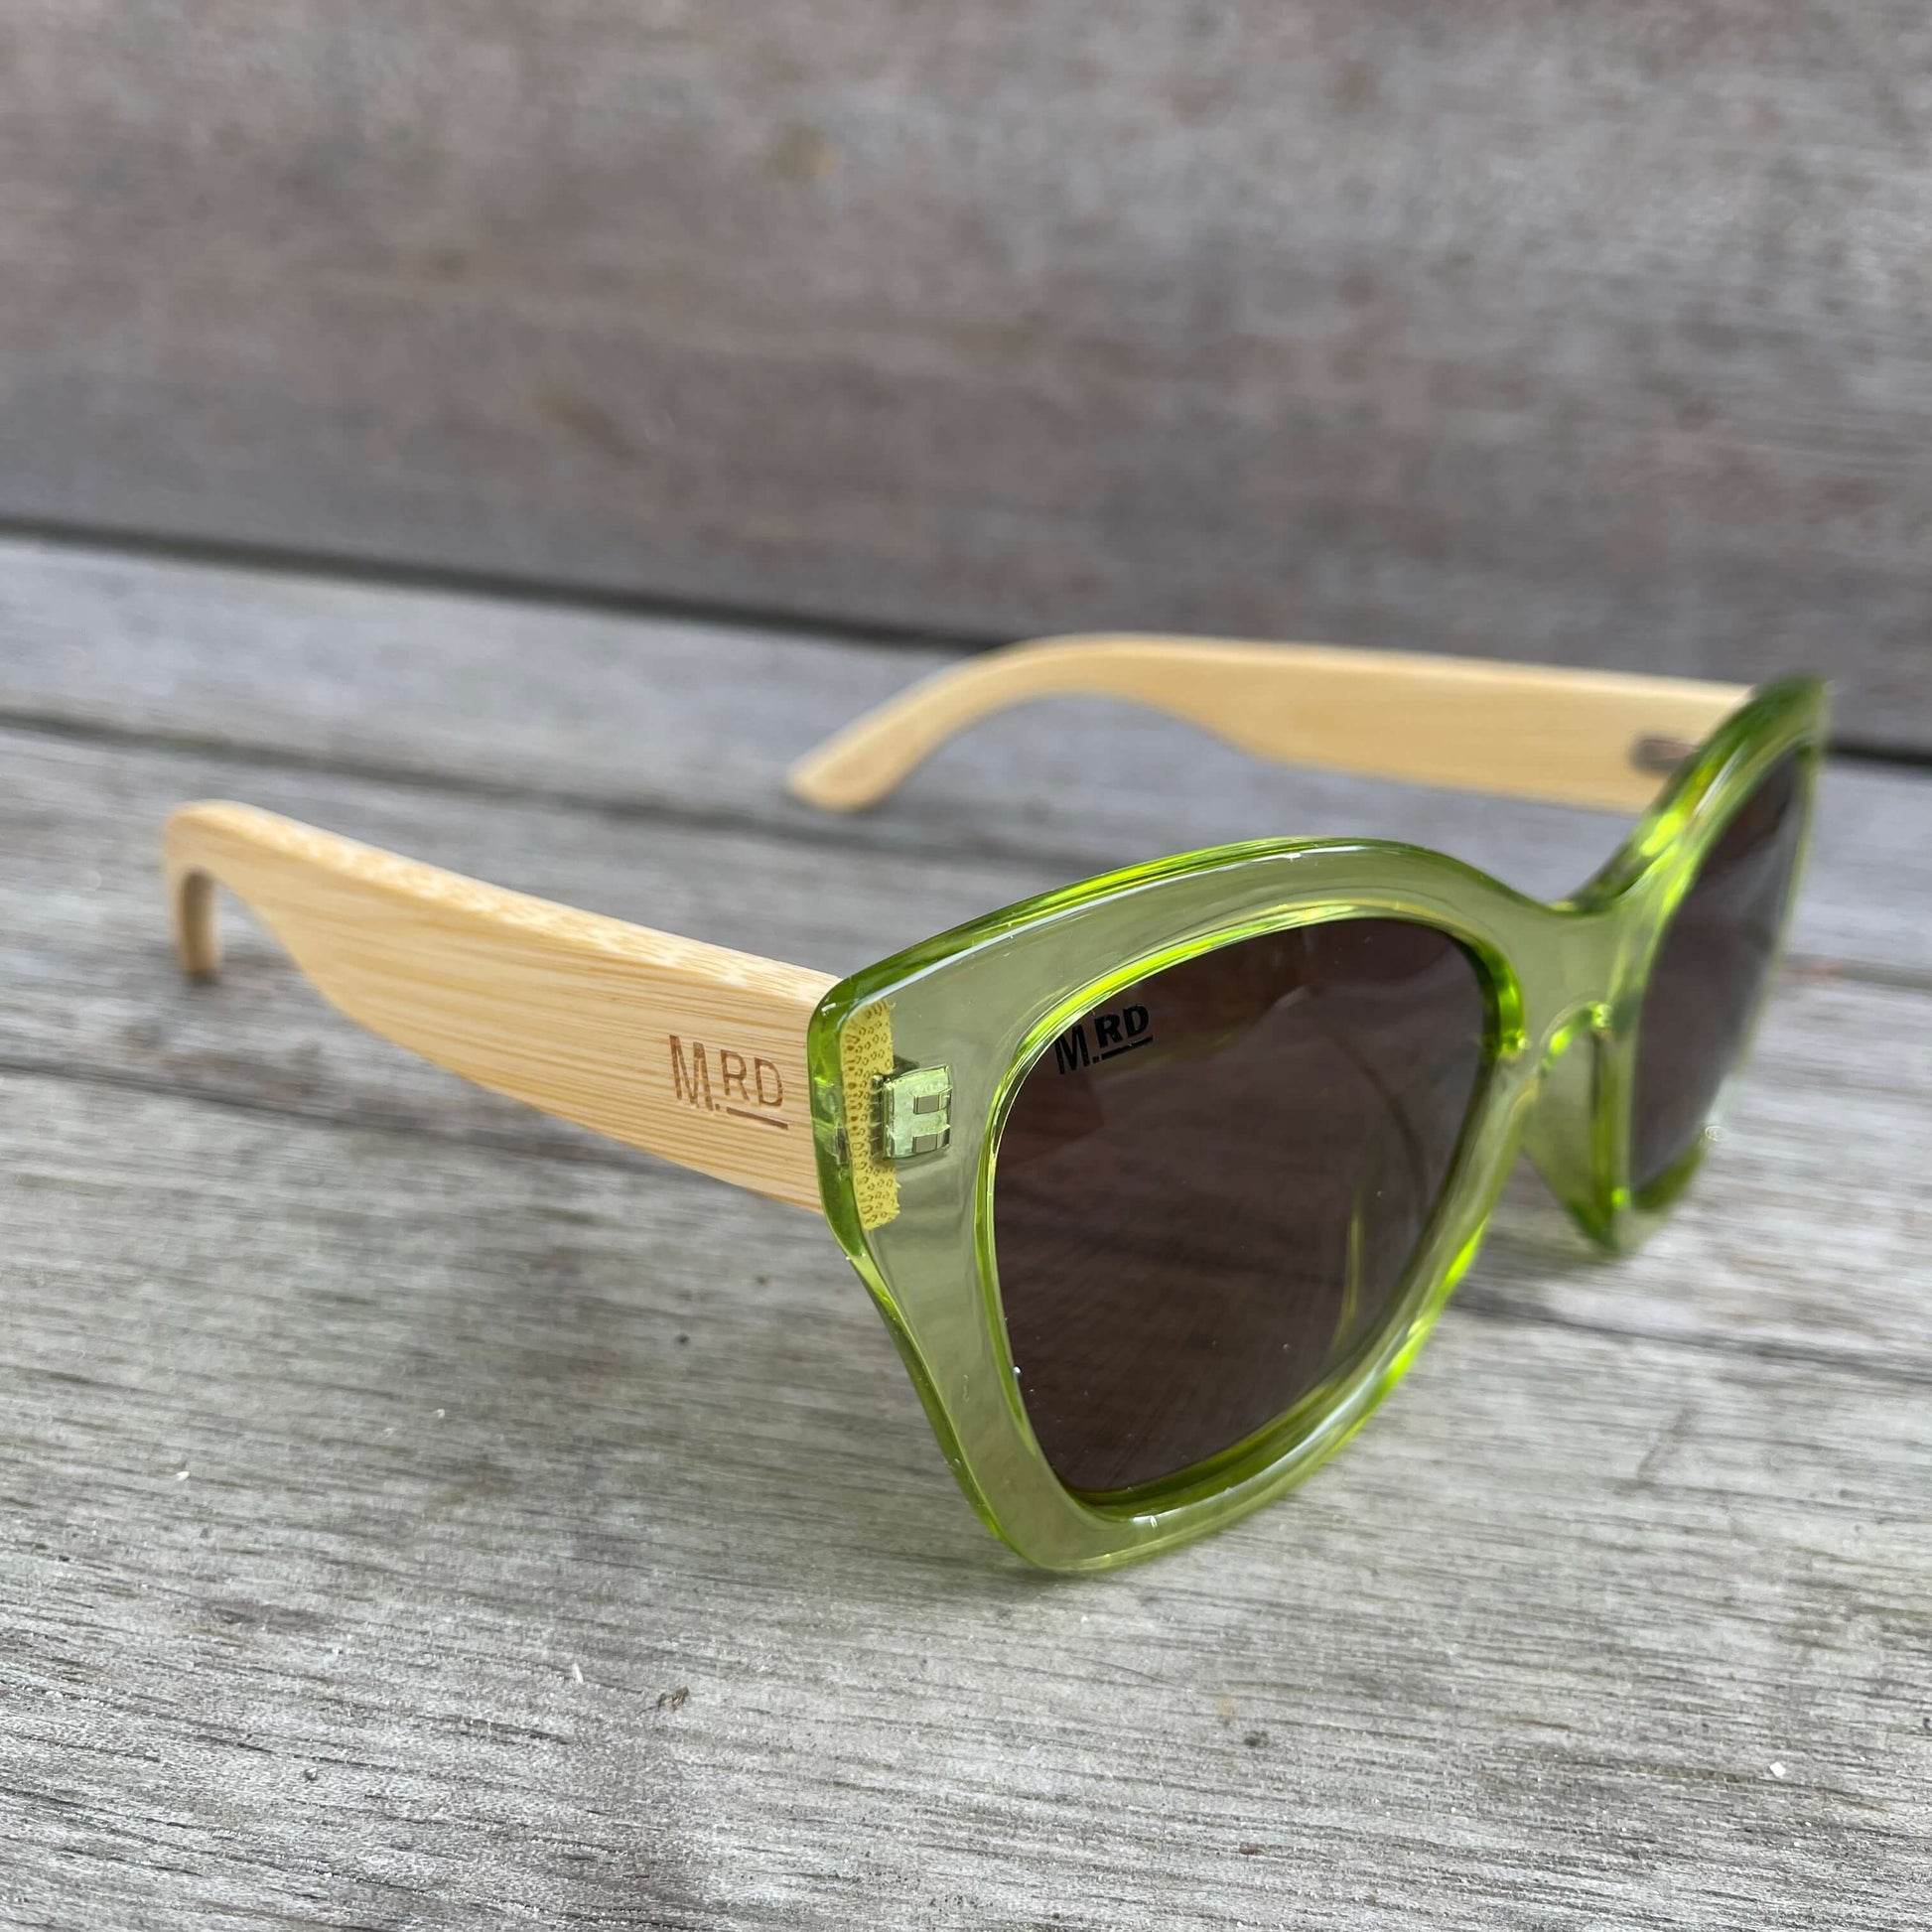 Womens sunglasses with light green frame and bamboo arms.